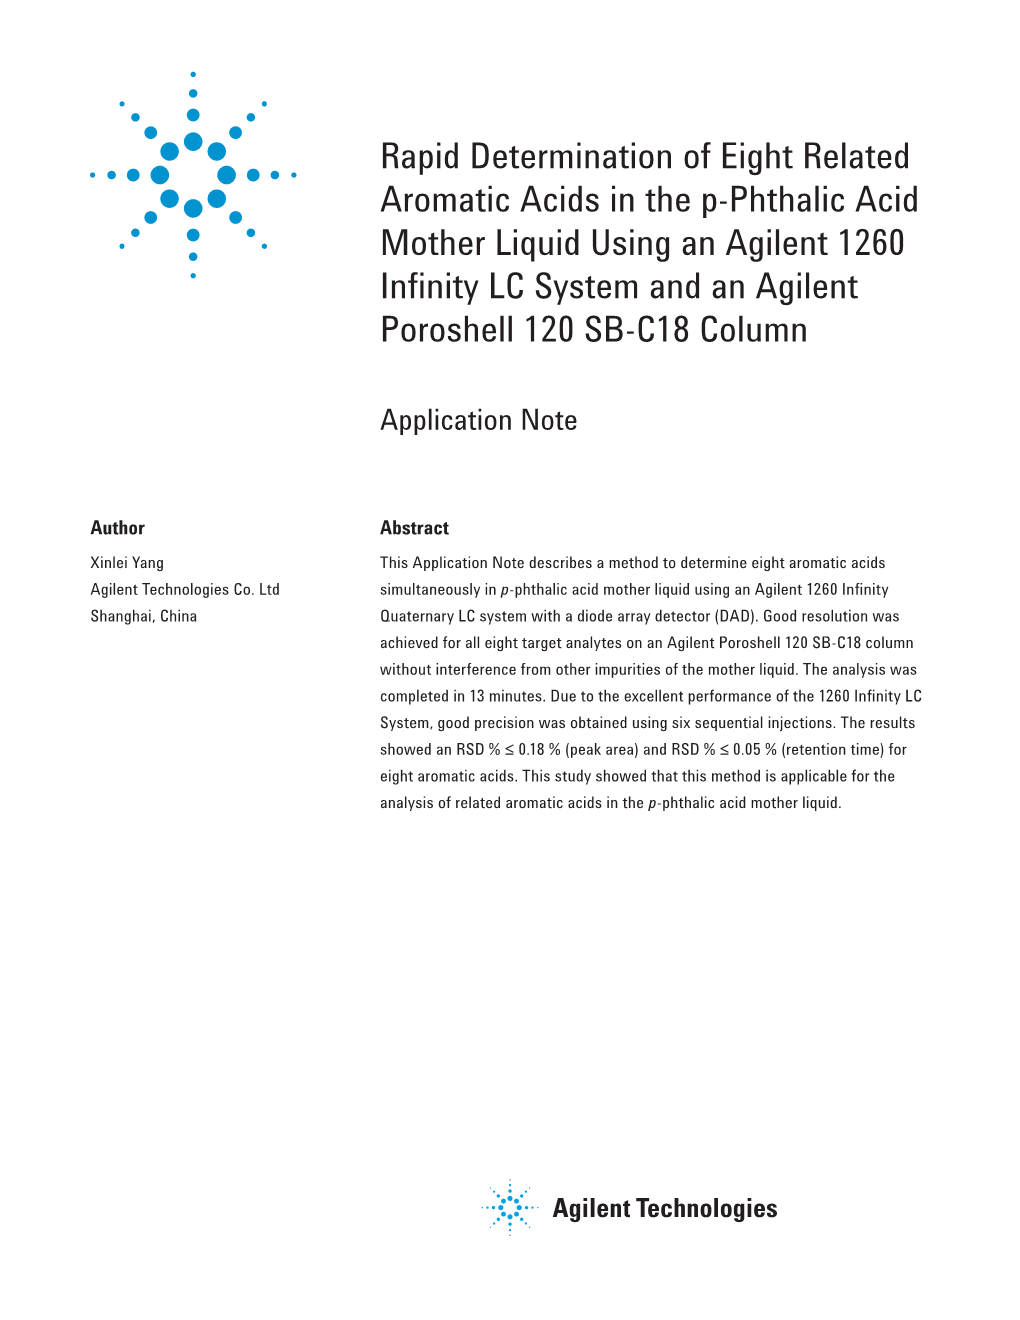 Rapid Determination of Eight Related Aromatic Acids in the P-Phthalic